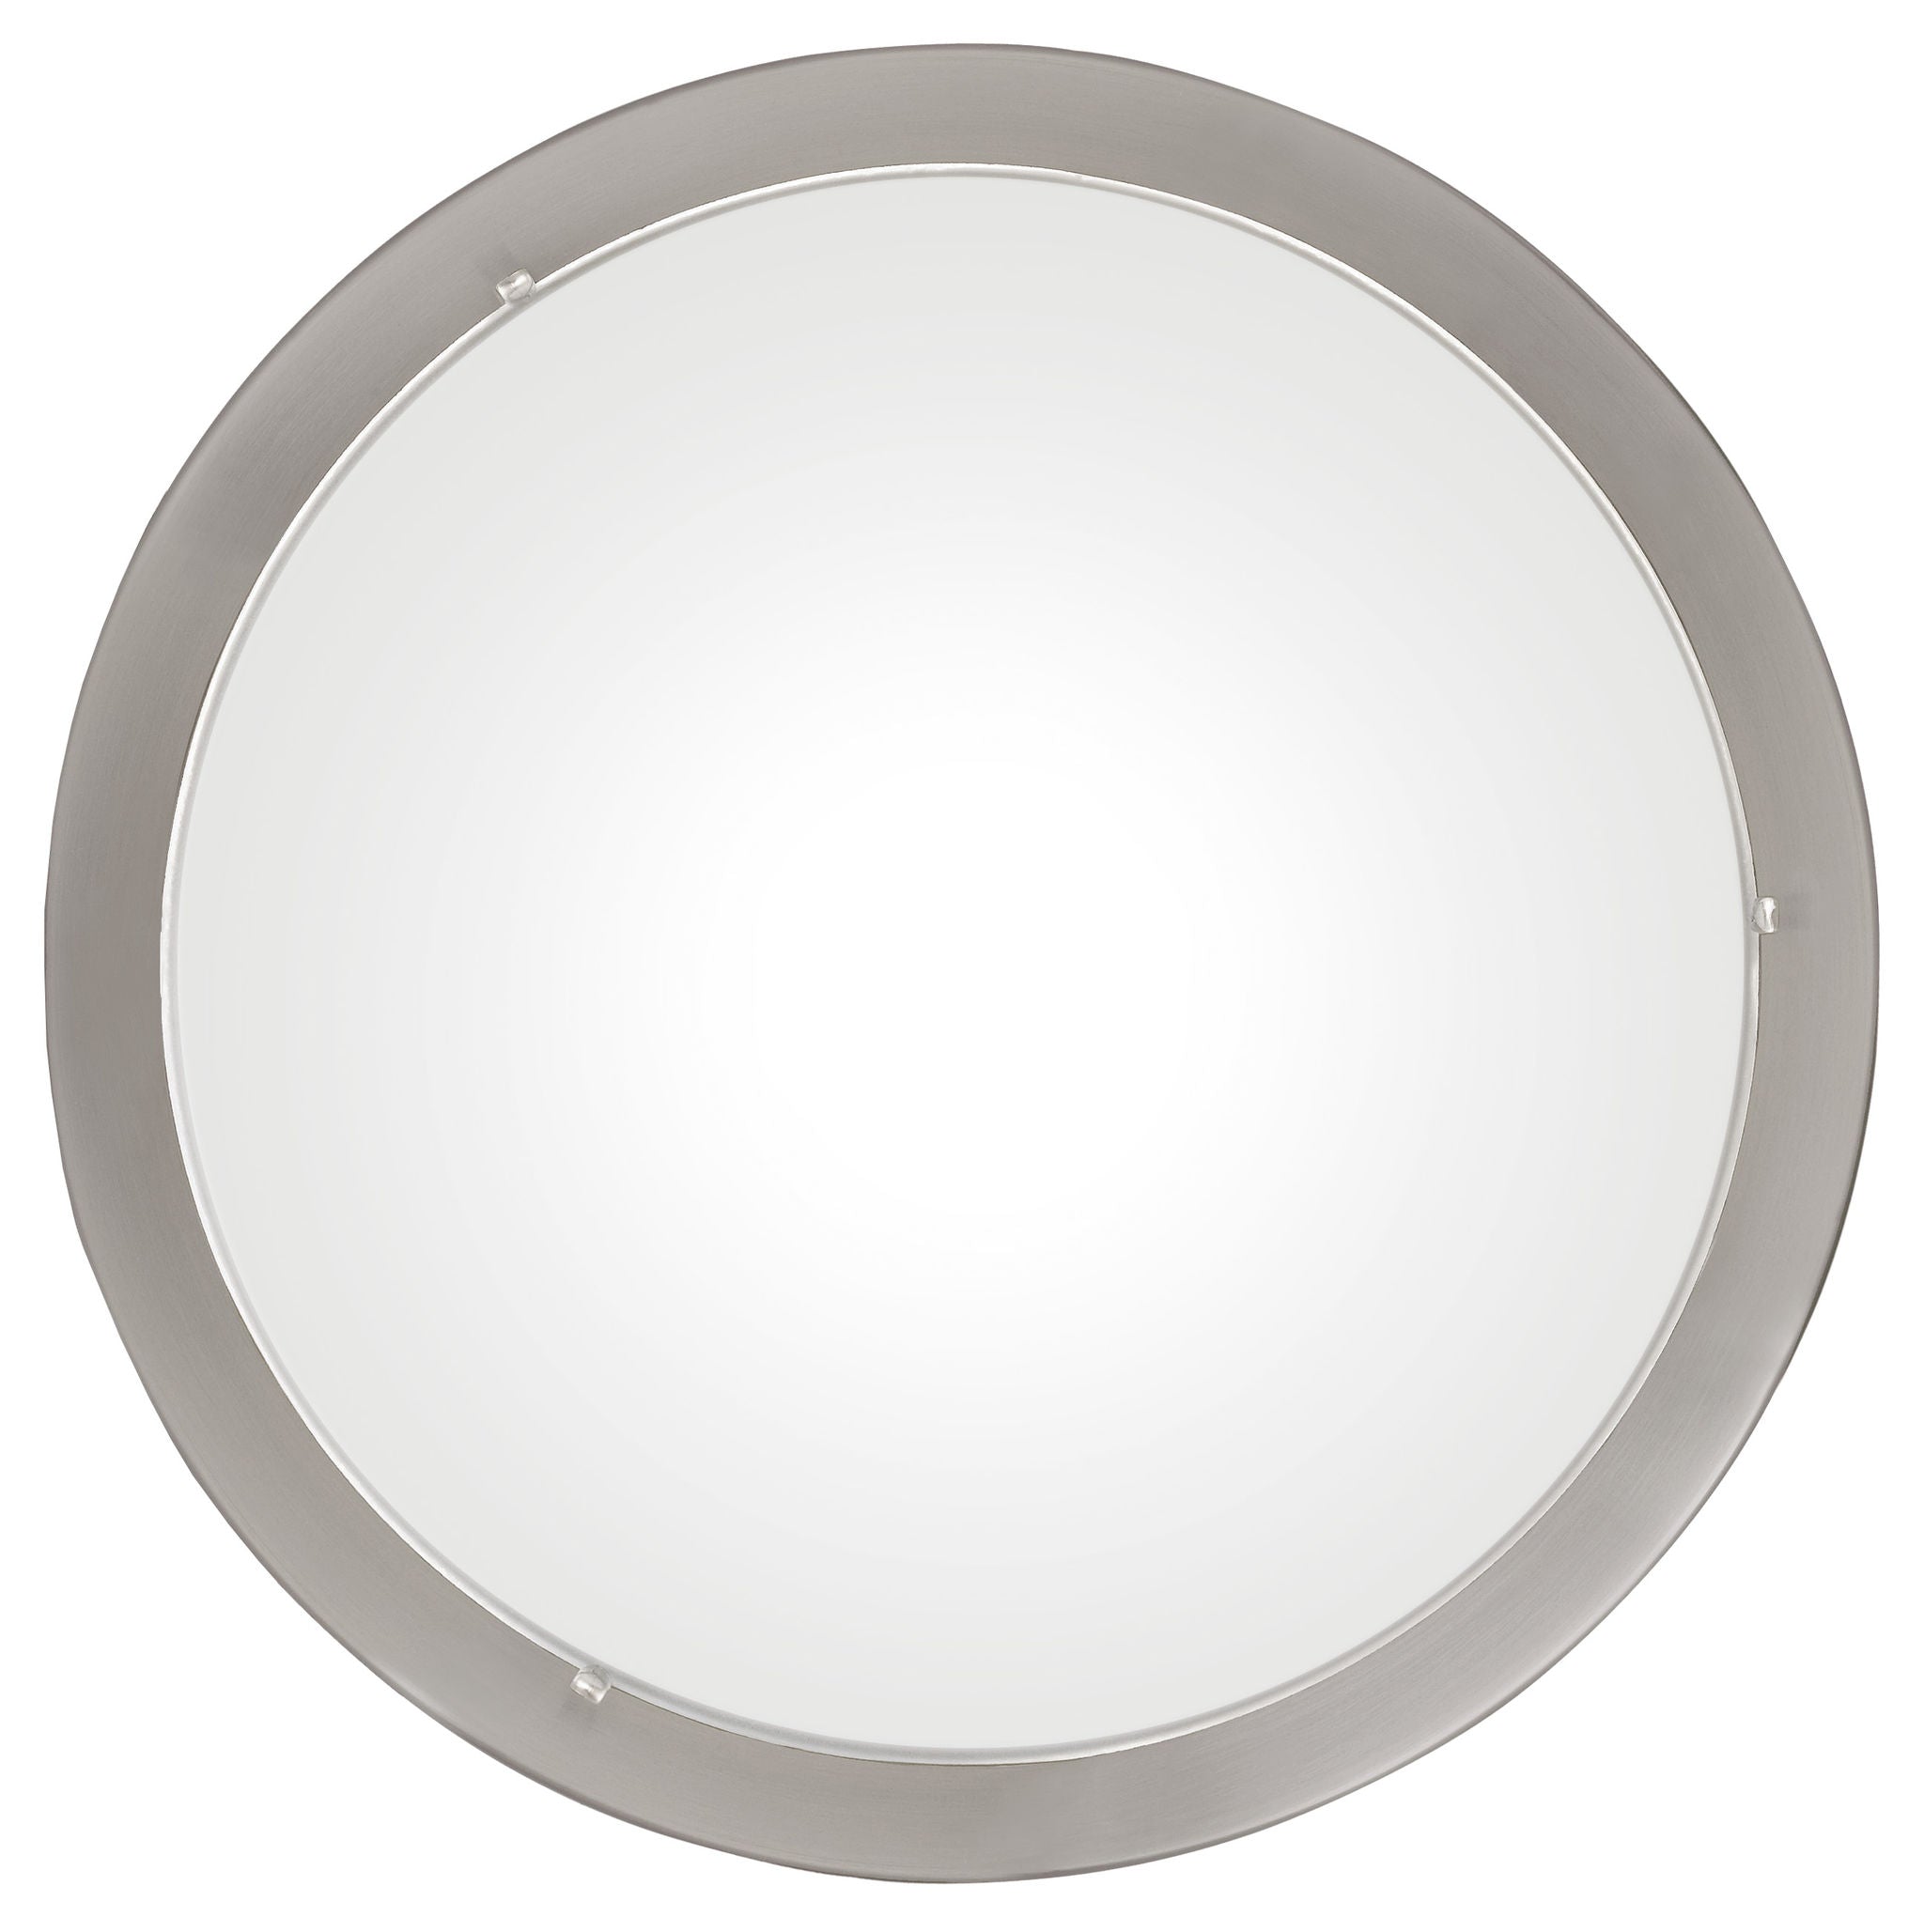 Planet Flush mount Stainless steel - 82942A | EGLO